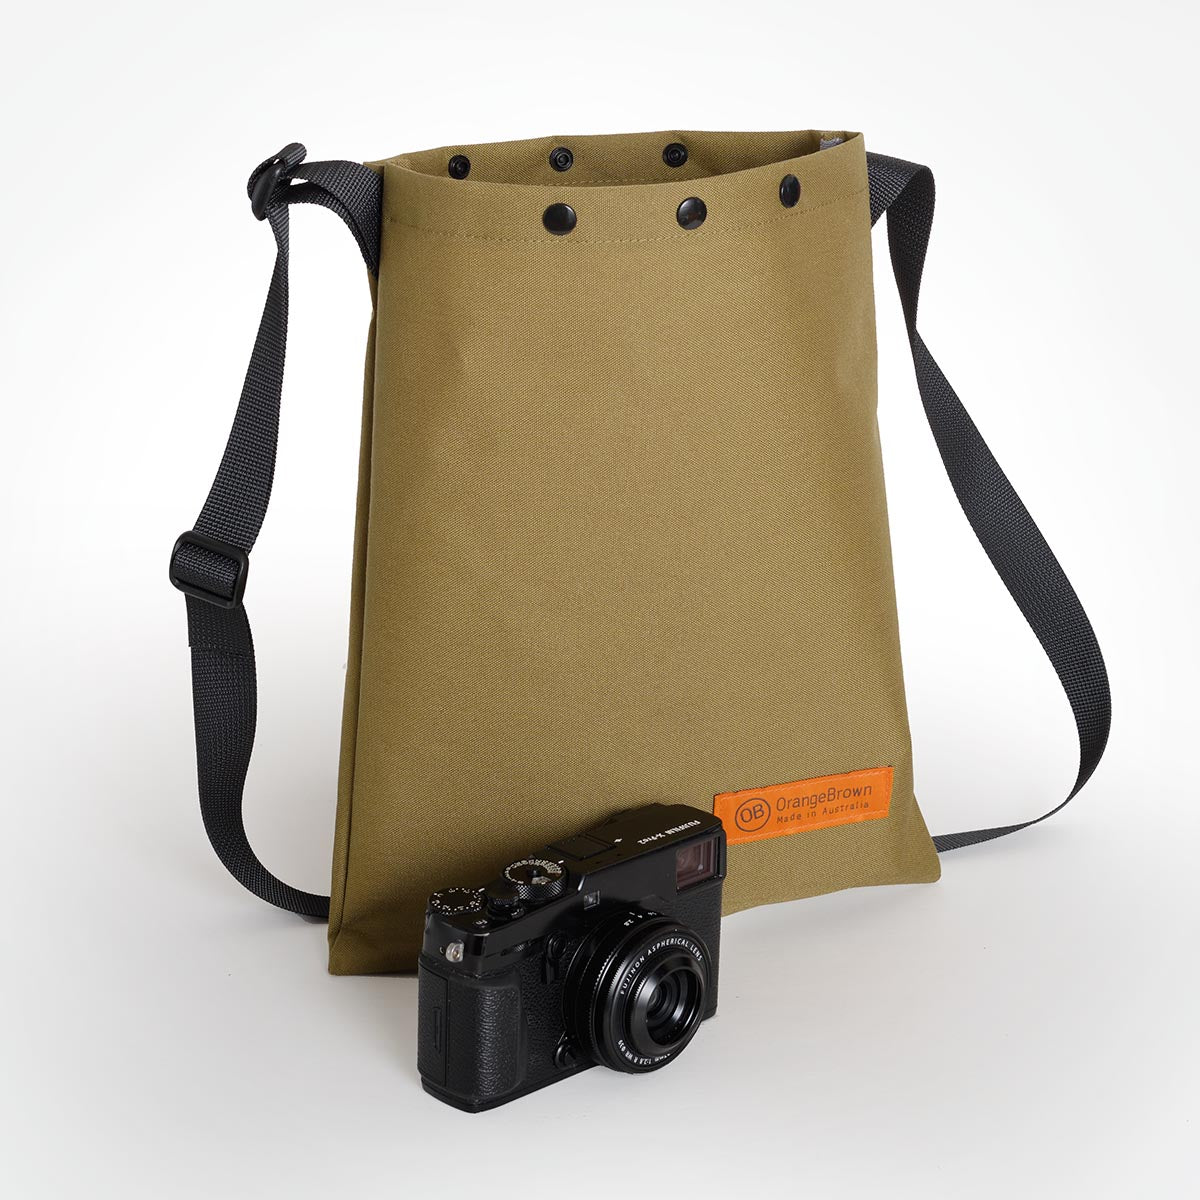 The OrangeBrown sling bag made from X-Pac X50 Tactical fabric used for carrying a FujiFilm X-Pro2 camera